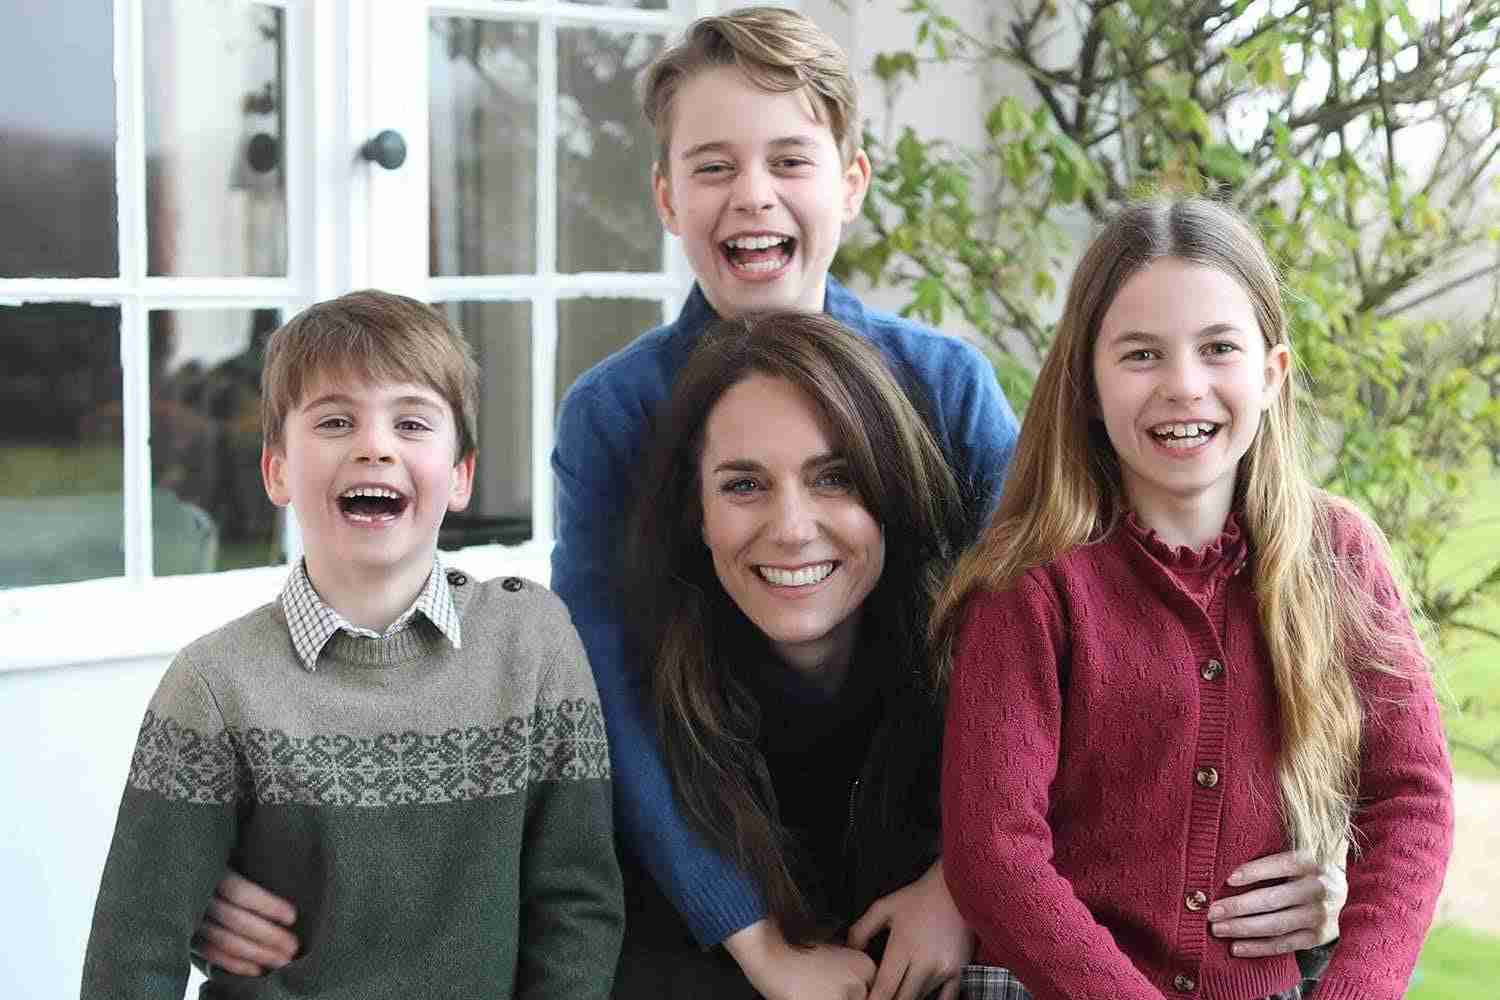 Kate Middleton's Mother's Day Photo Had at Least 16 Editing Errors as Experts Find Proof of Photoshop